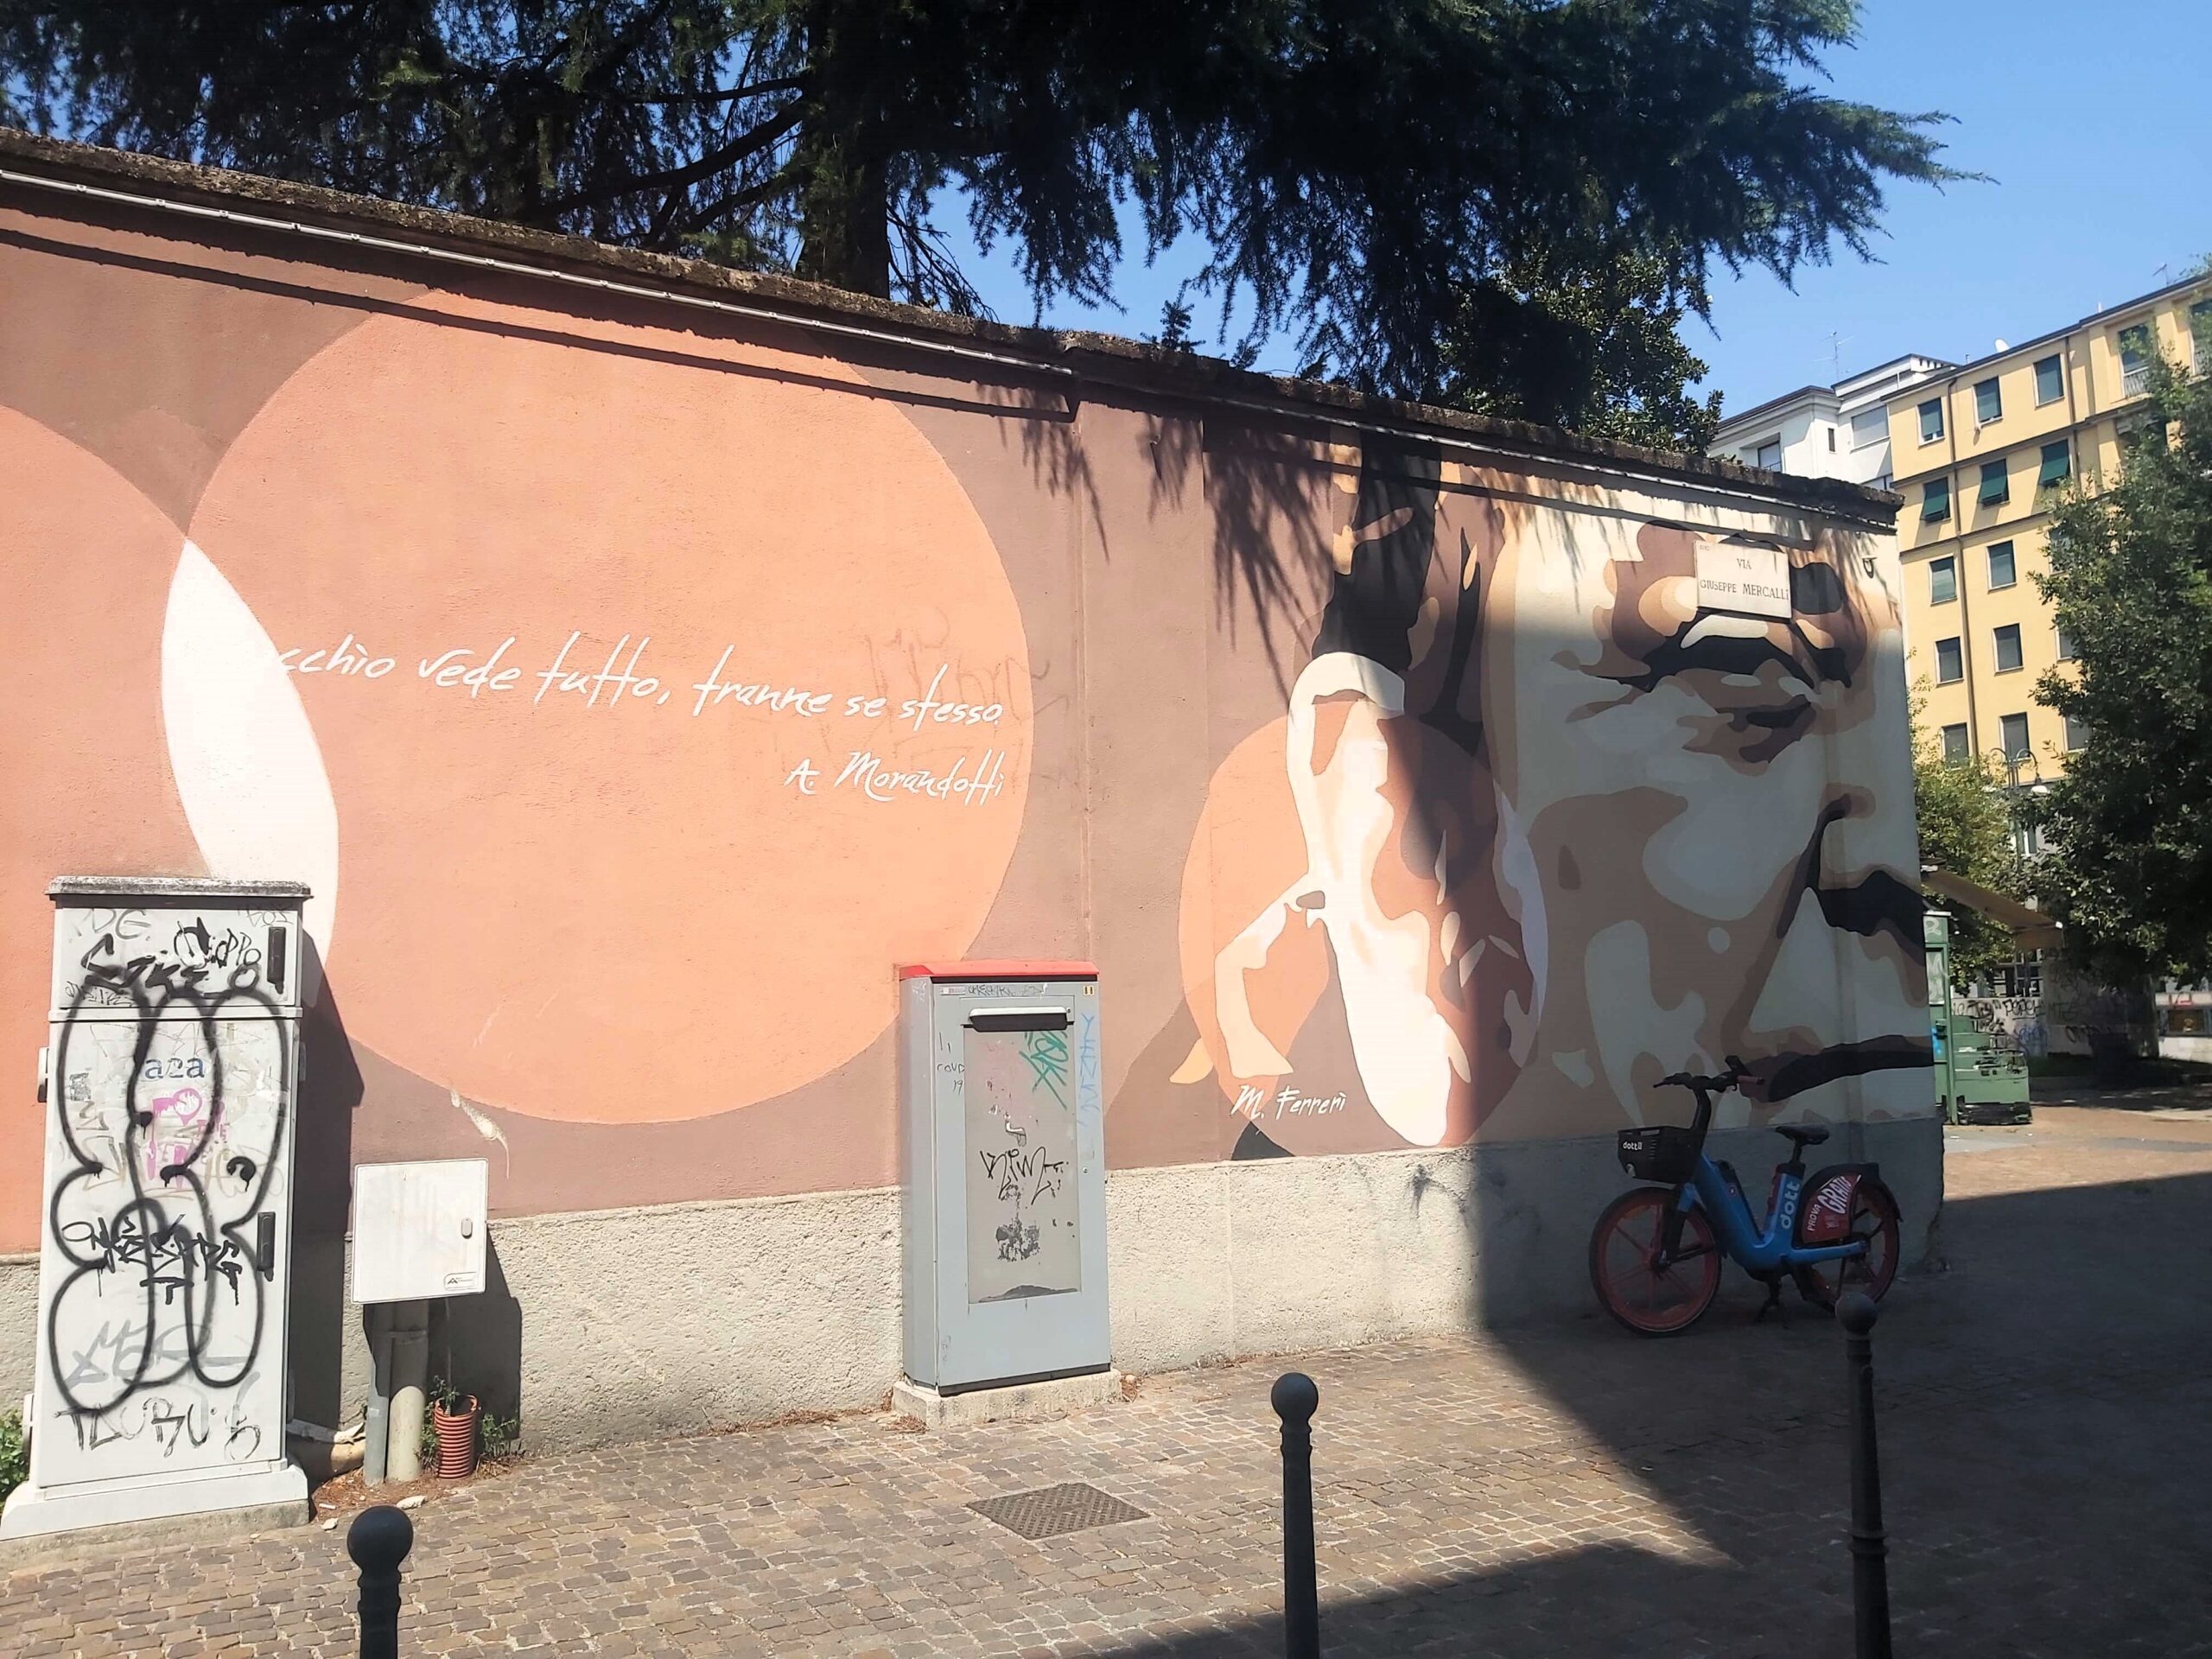 A graffiti image of a man's face and a quote in Milan, Italy